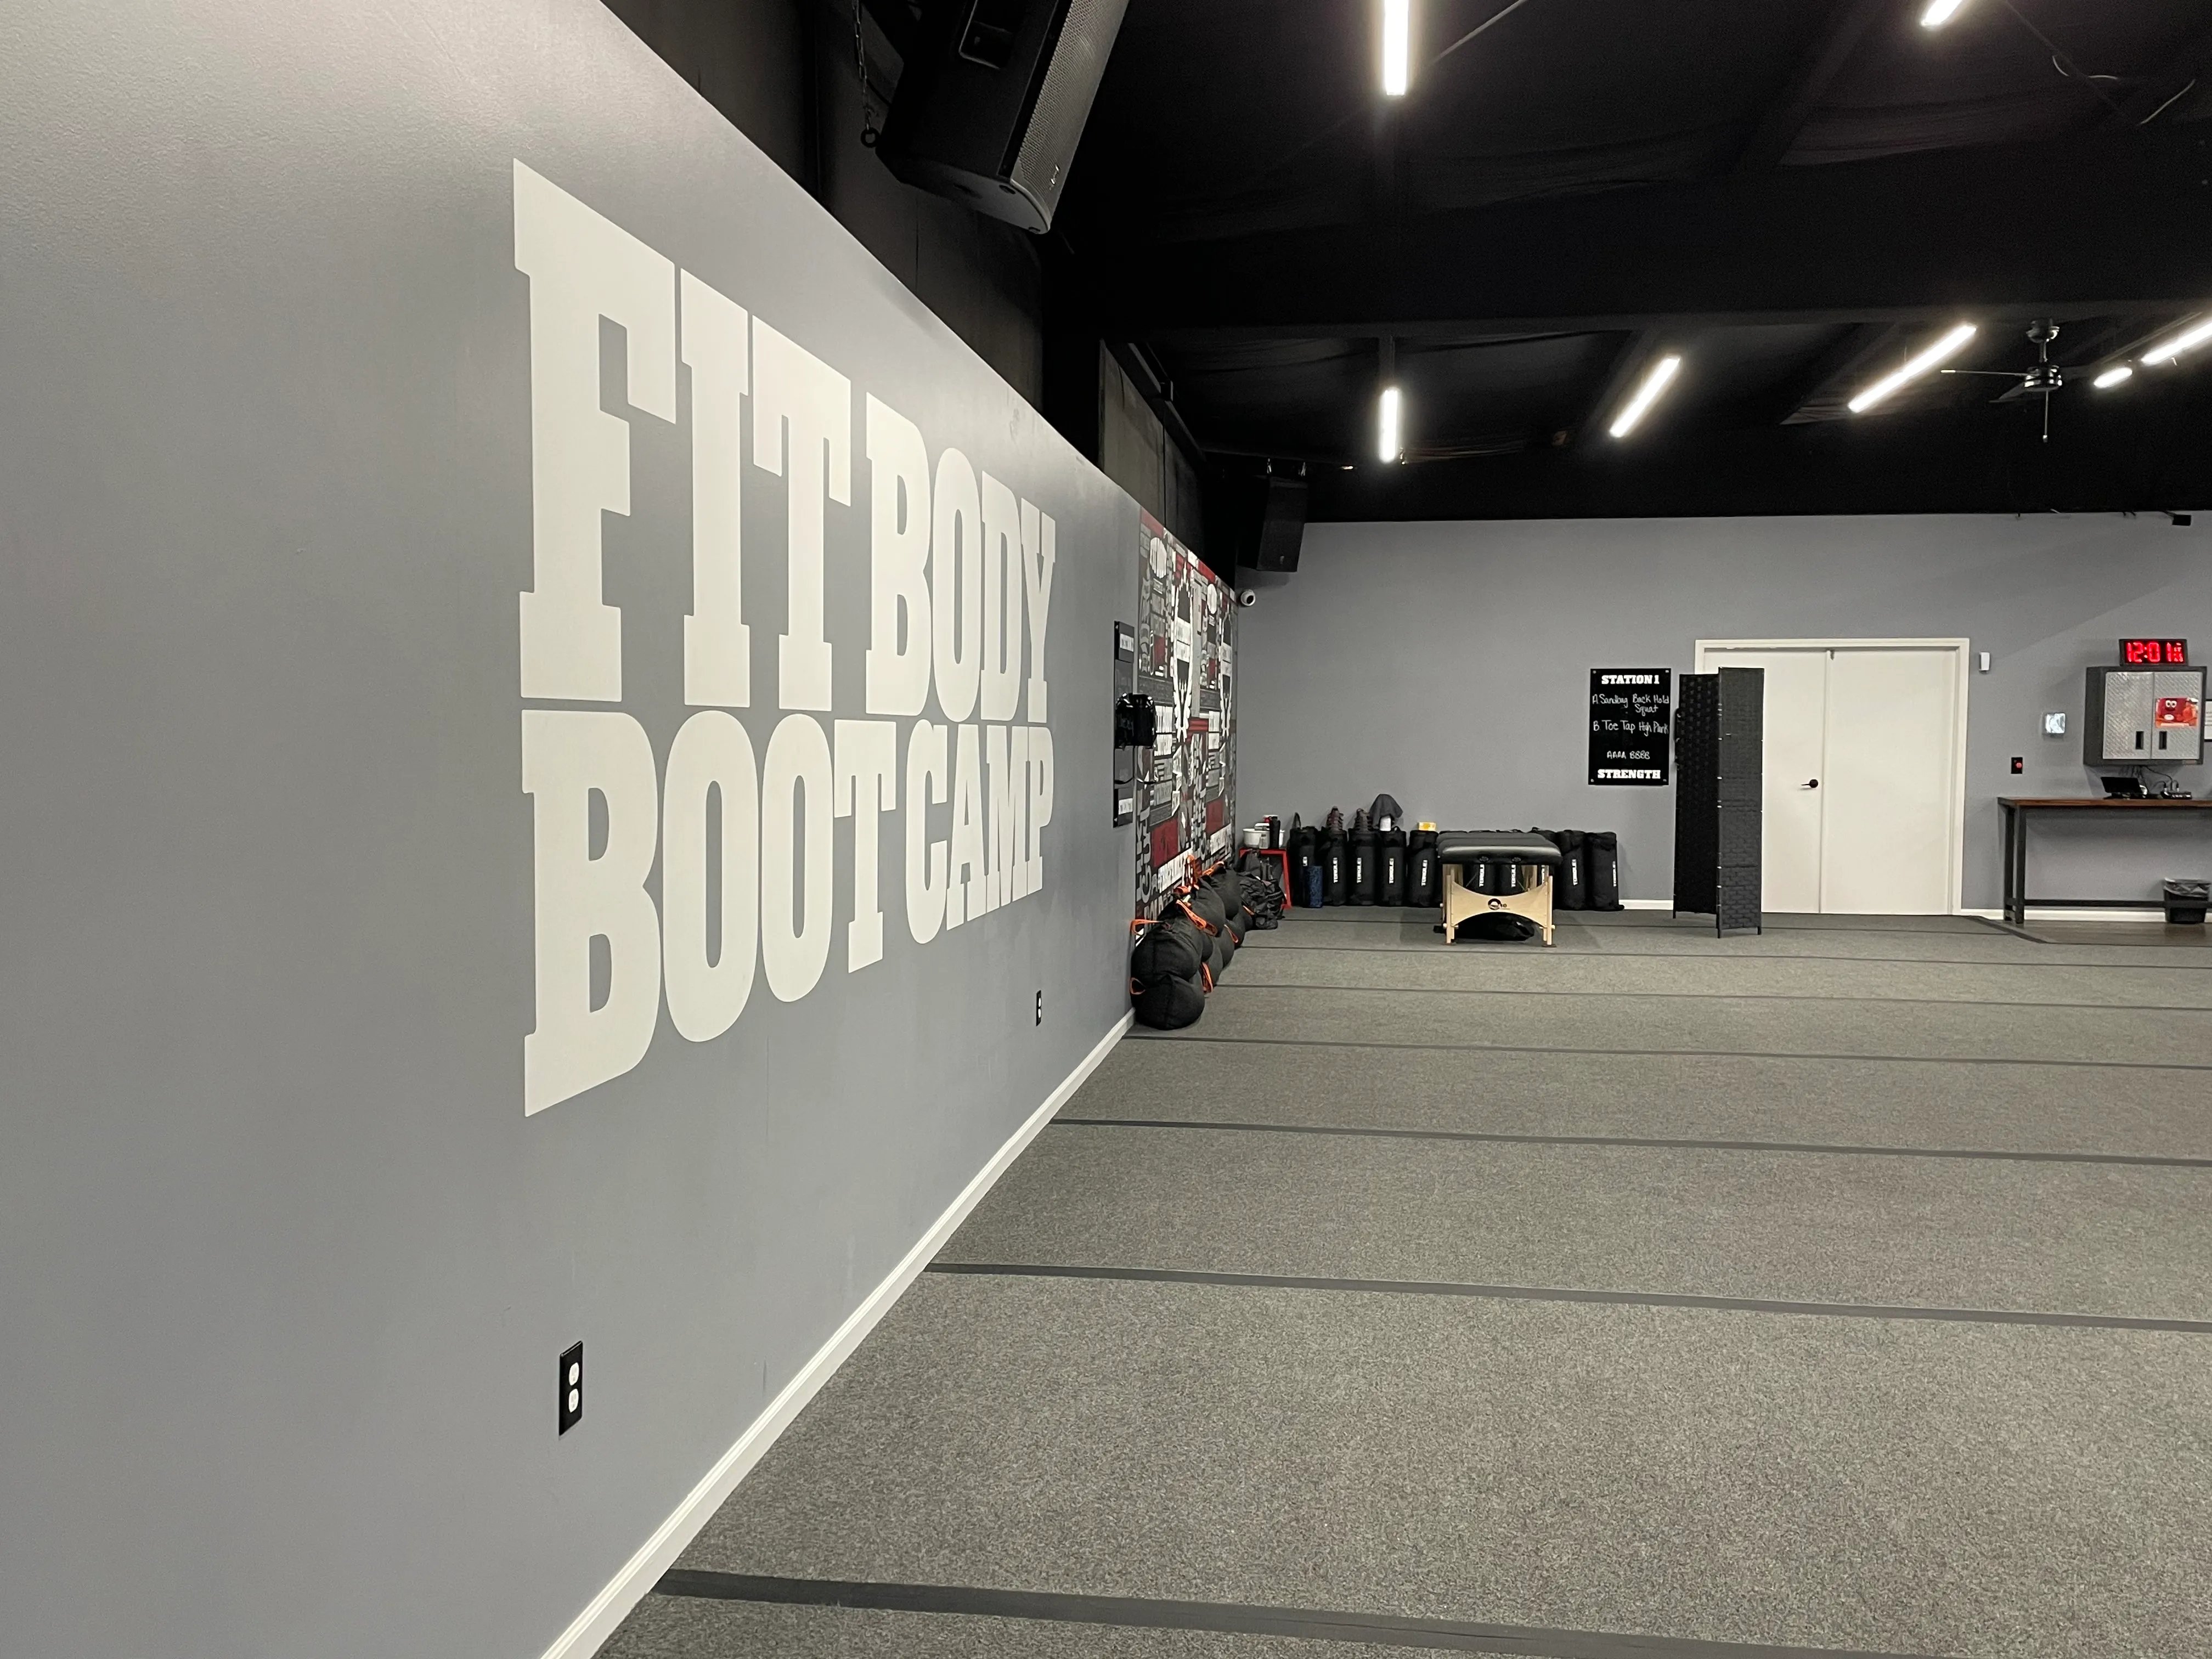 A Fit Body Boot Camp franchise.